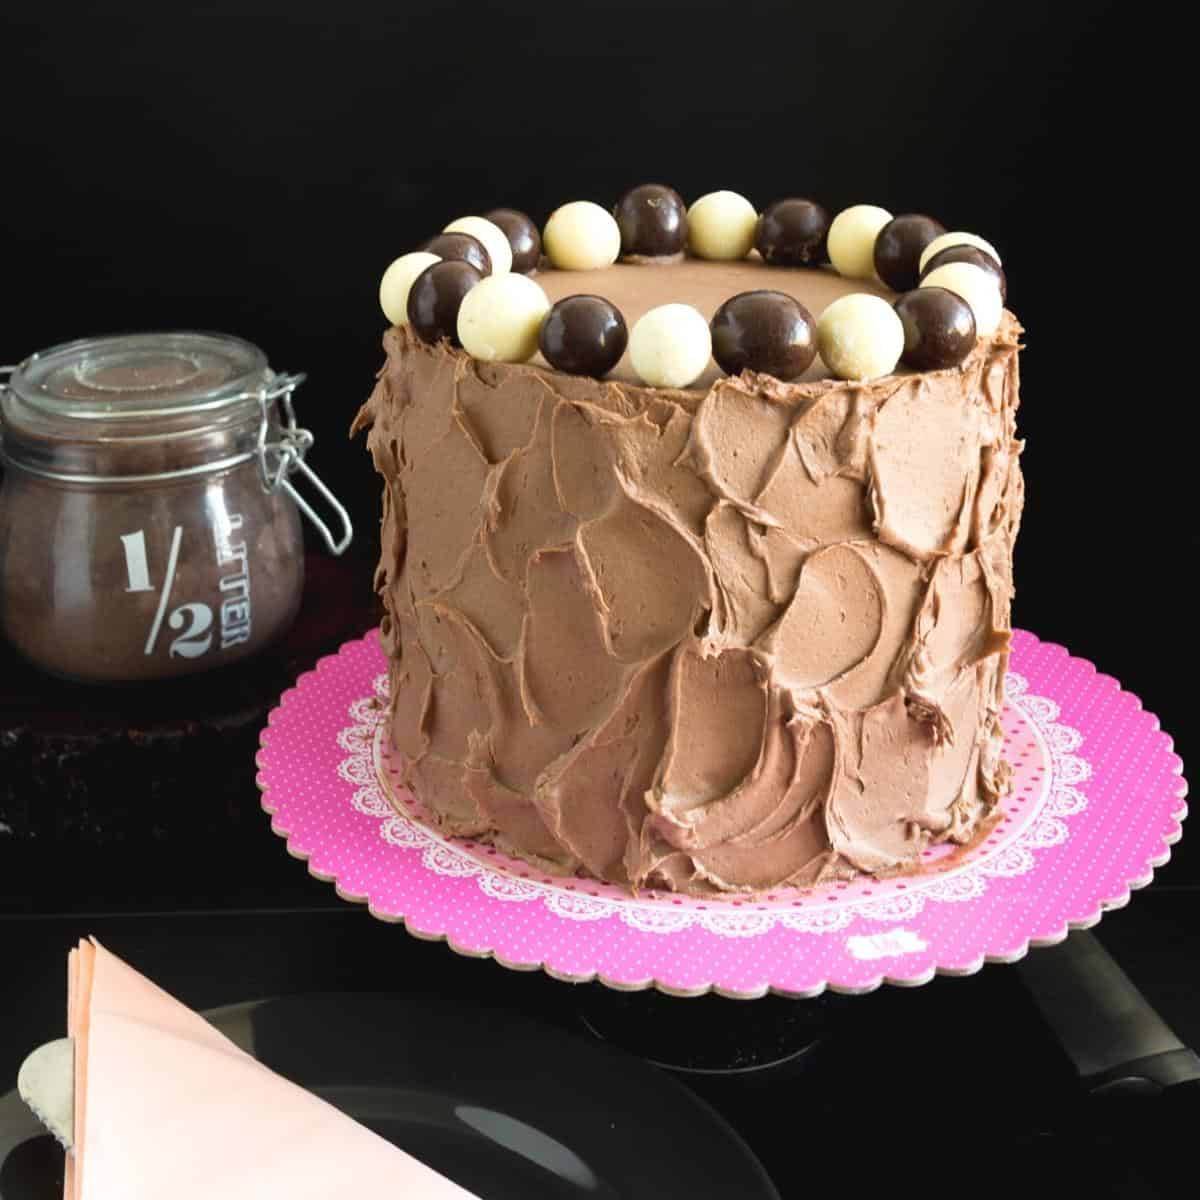 A frosted cake with chocolate balls.